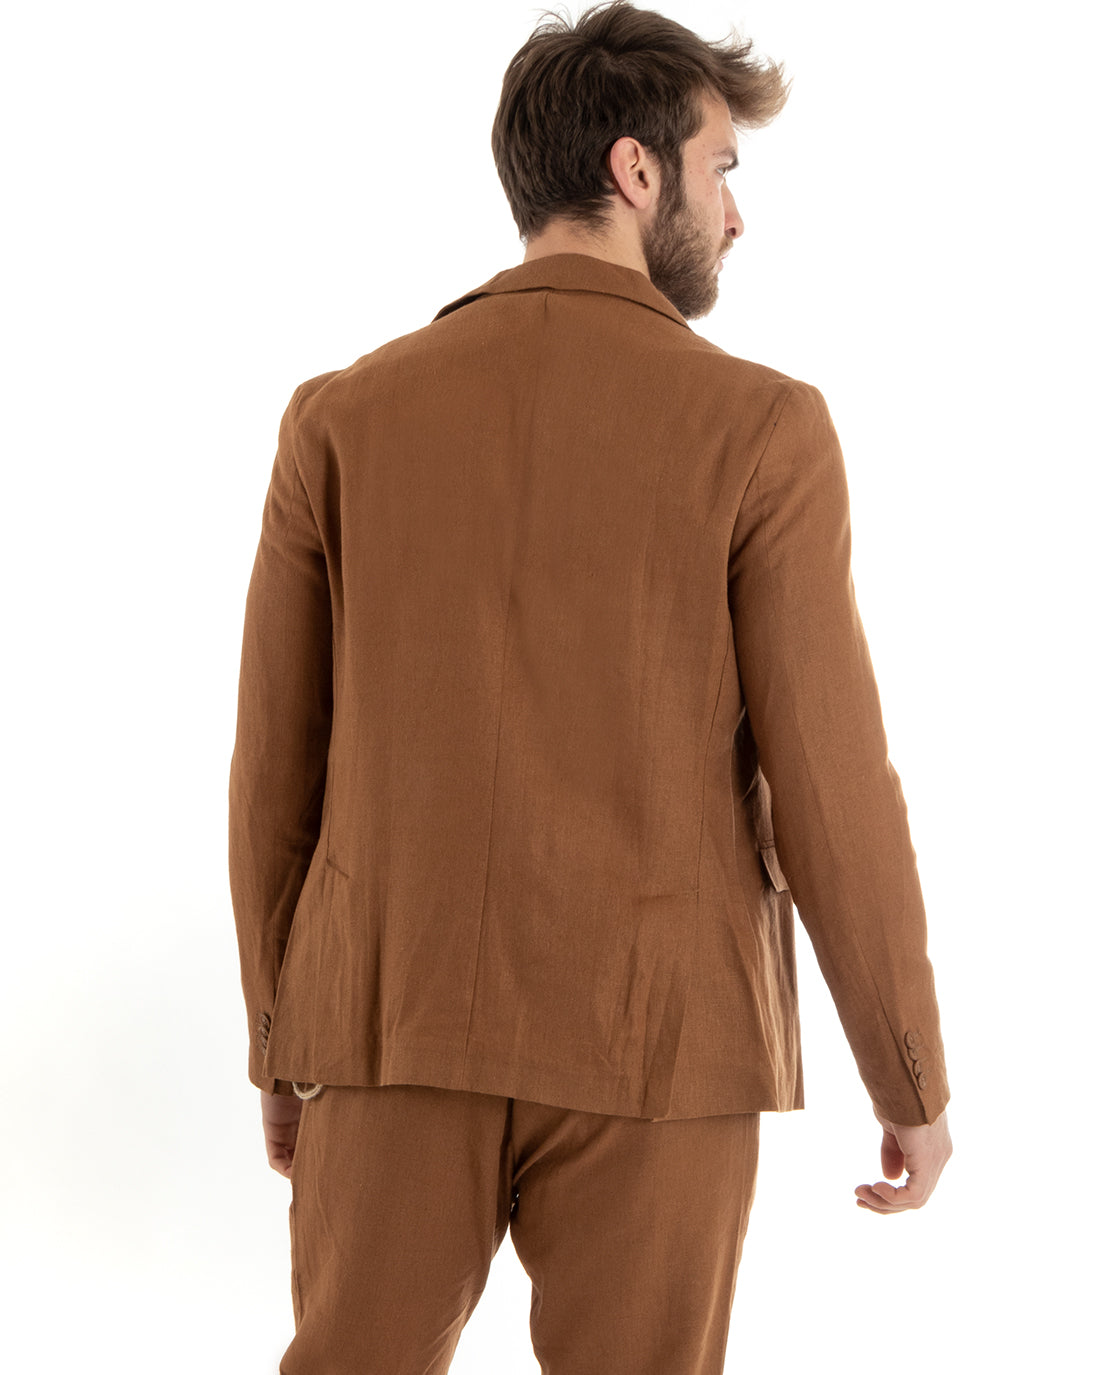 Men's Single-Breasted Linen Jacket Solid Color Camel Tailored Ceremony Elegant Casual GIOSAL-G3058A